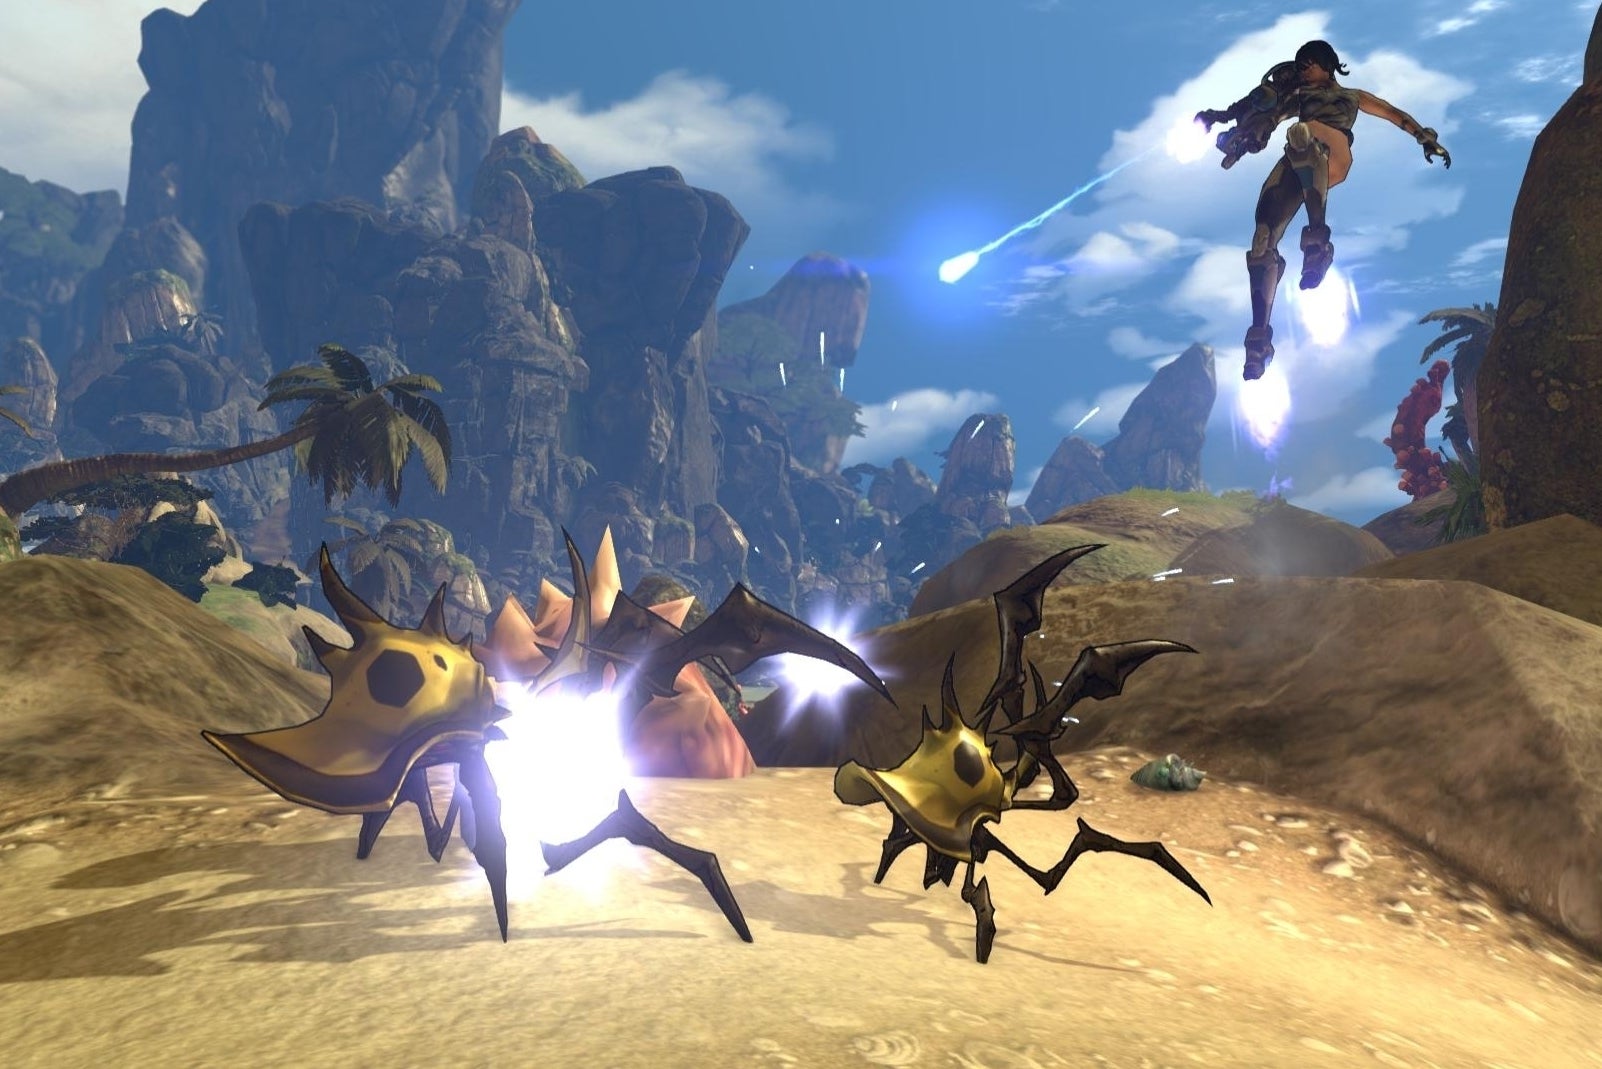 Image for Red 5 axes 10 per cent of staff ahead of the release of Firefall